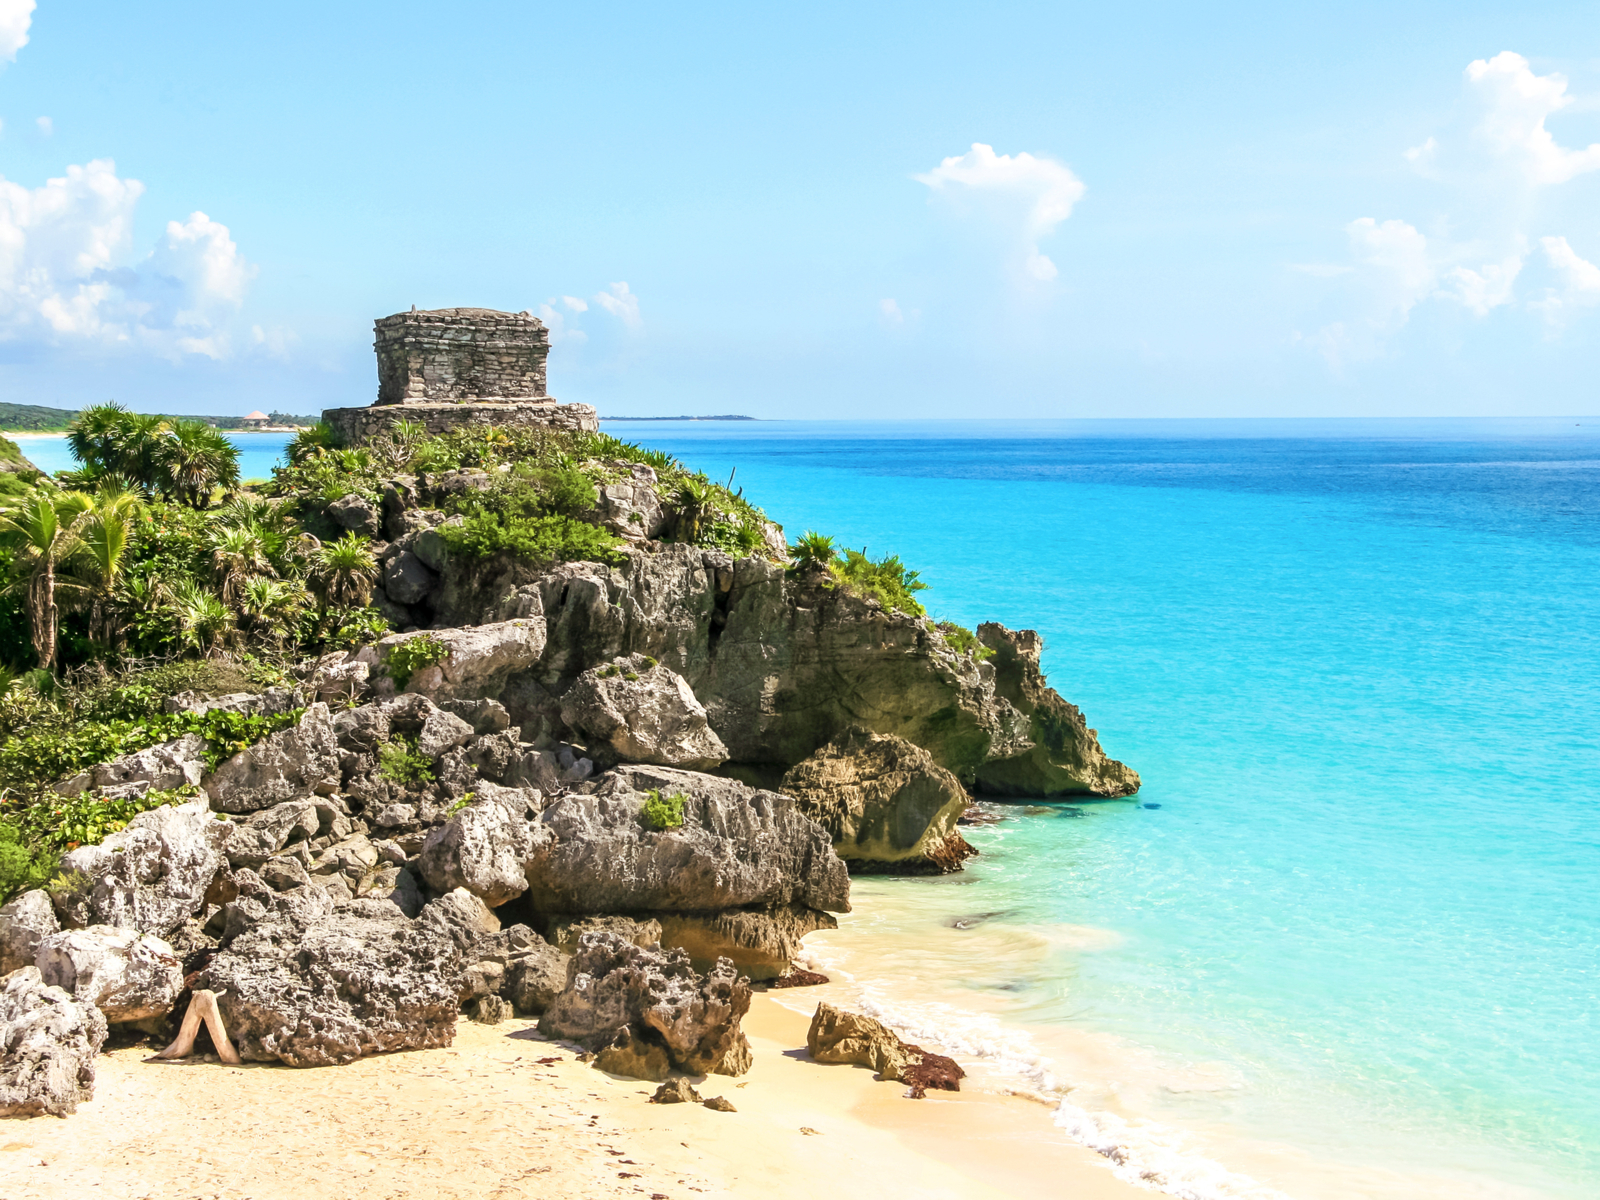 Panoramic ruins of Tulum, a must-see sight when staying at a Cancun All-Inclusive resort